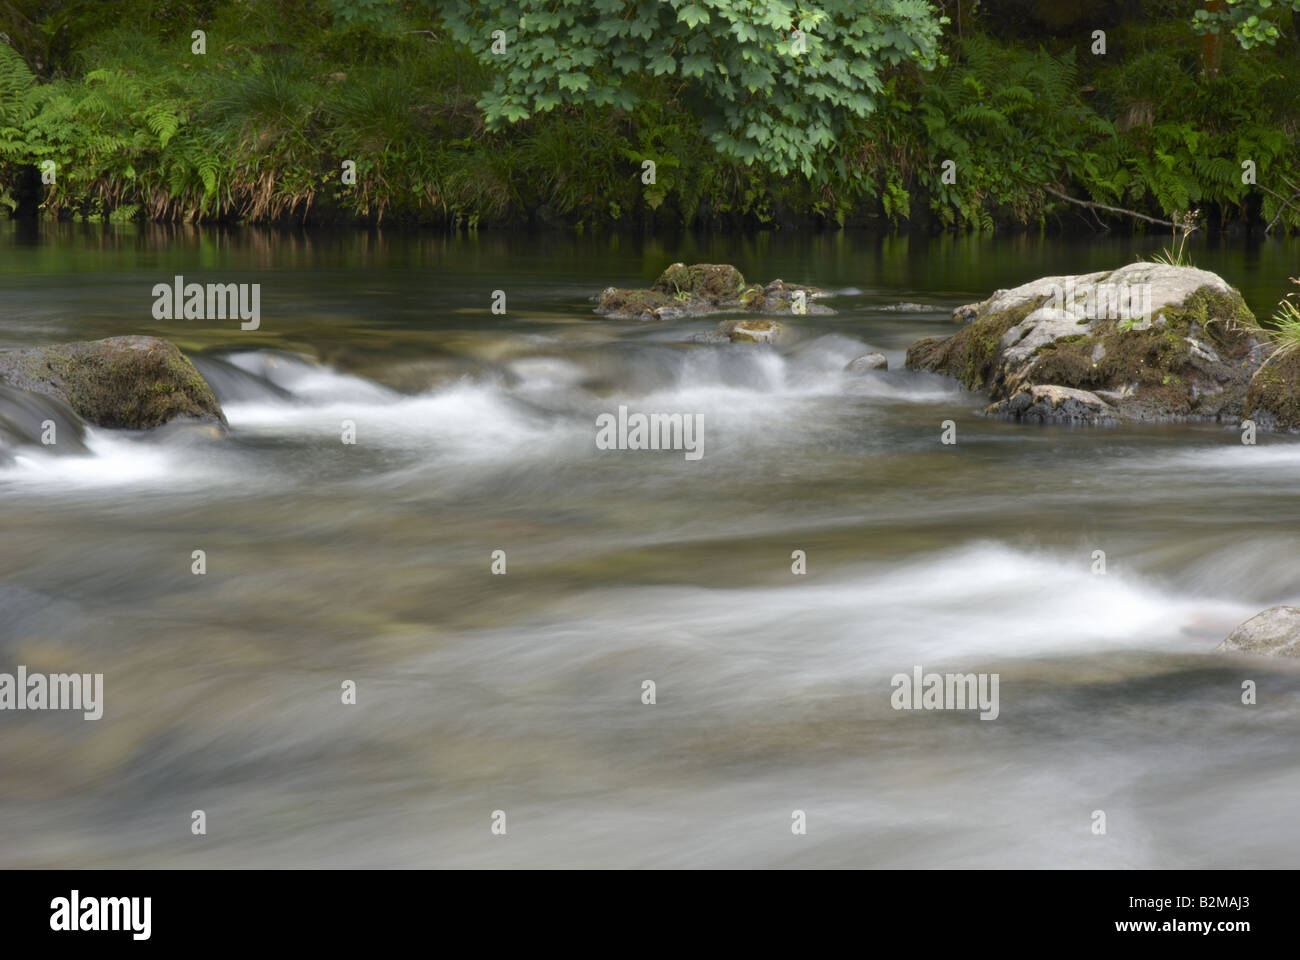 Water flowing over stones in a river bed Stock Photo